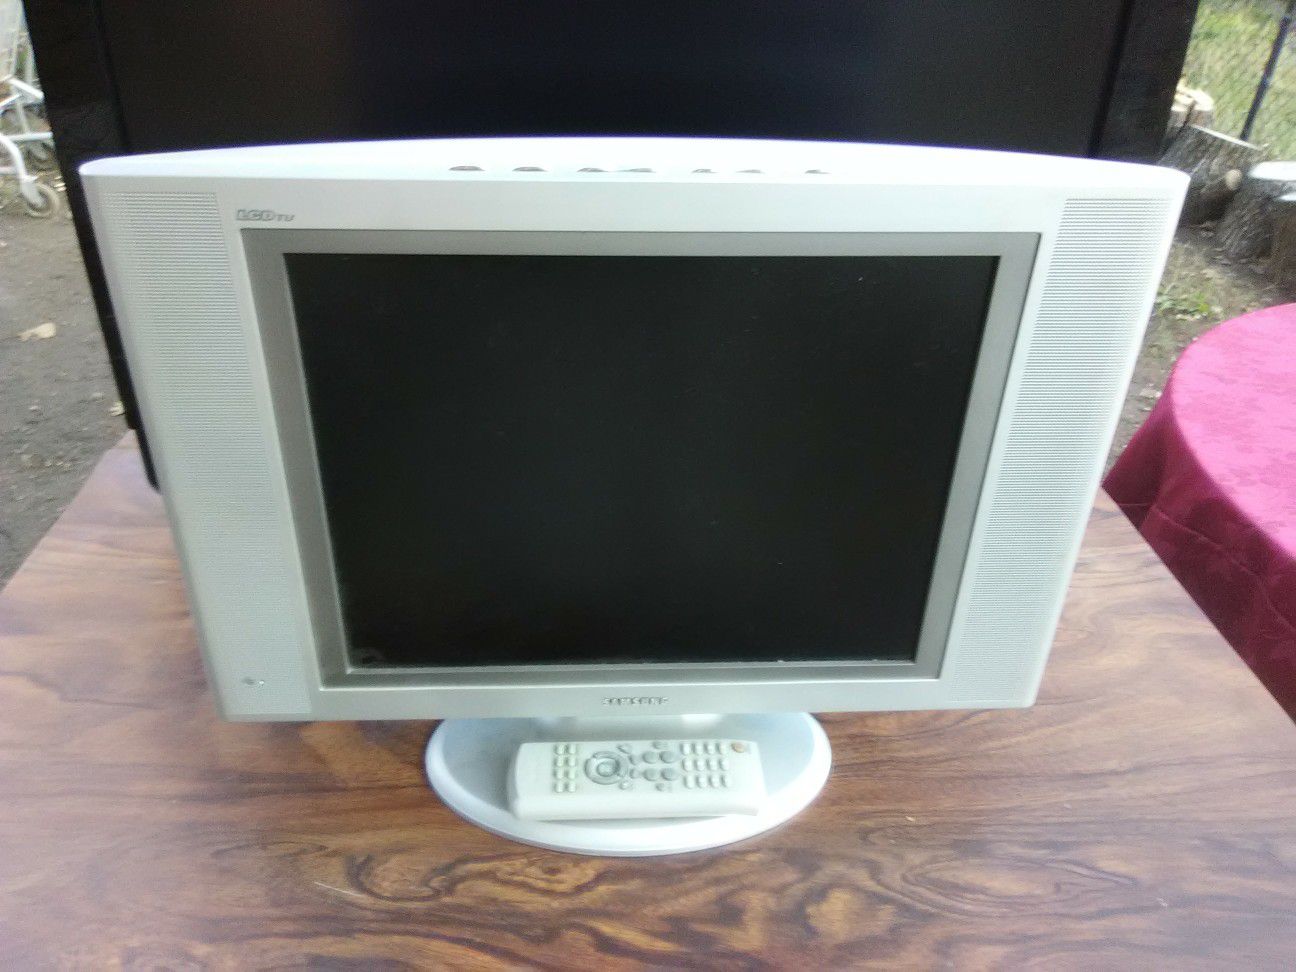 Samsung 17 inch widescreen LCD TV with remote control $75